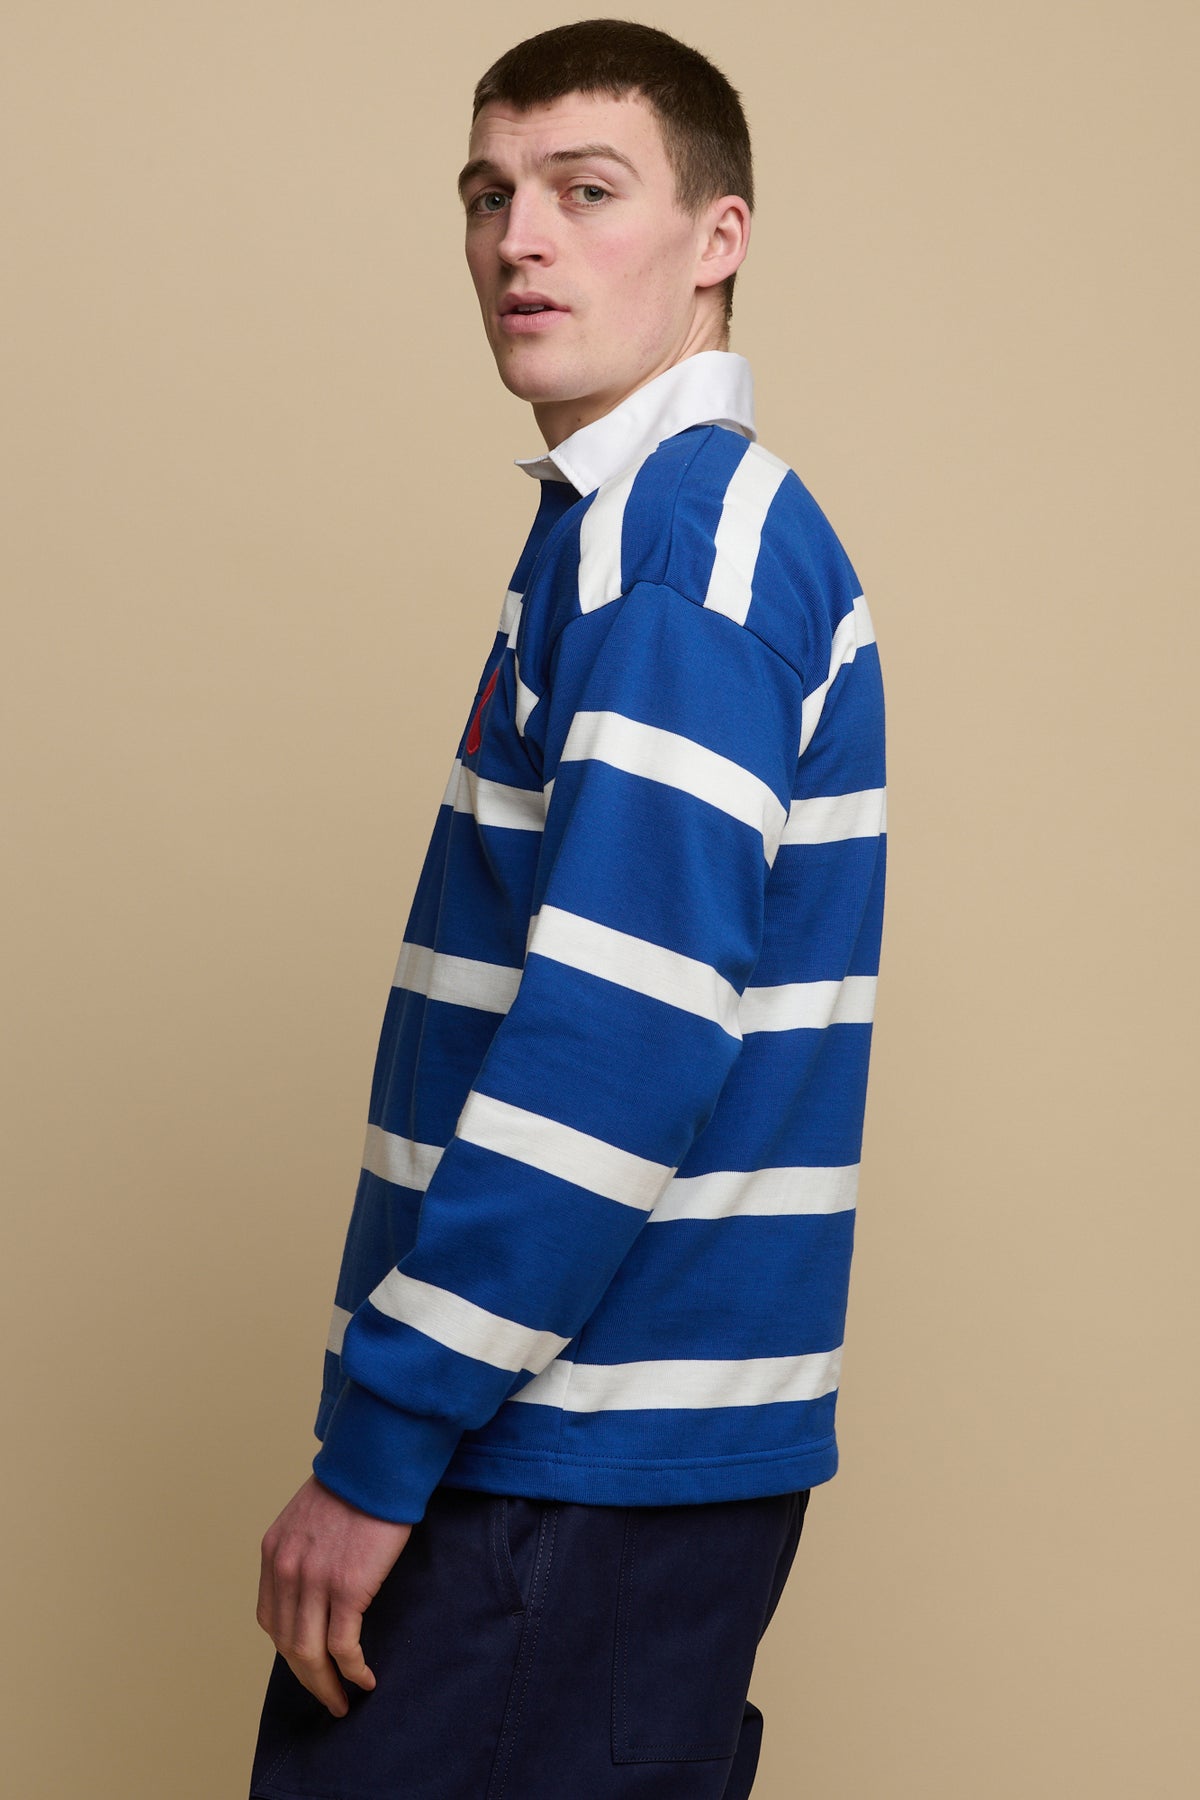 
            The side of brunet male wearing blue and white stripe logo rugby shirt